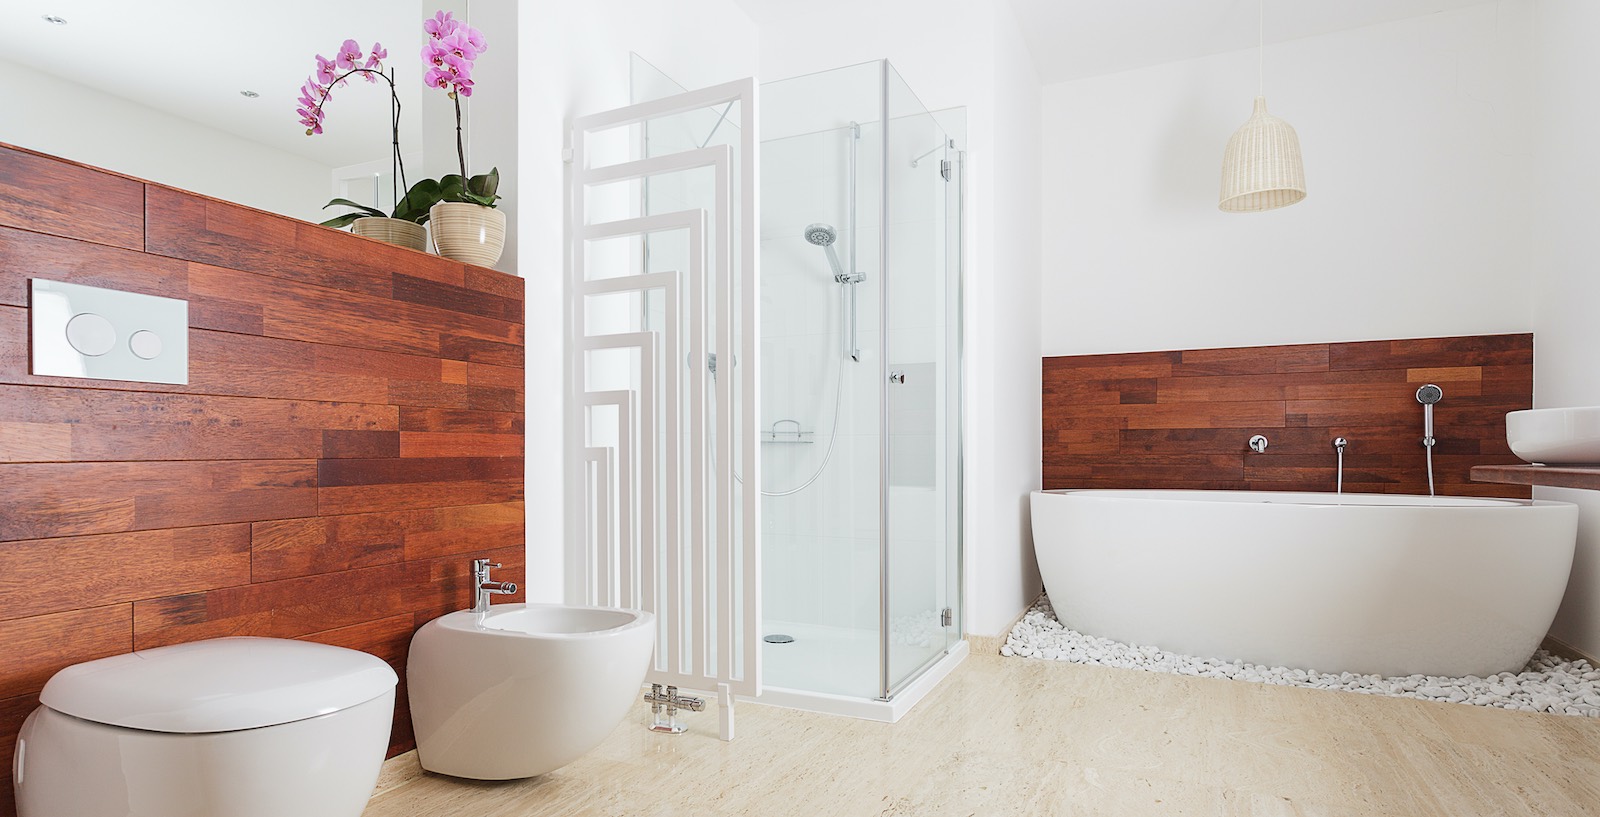 Spacious bright bathroom remodel is within your reach!